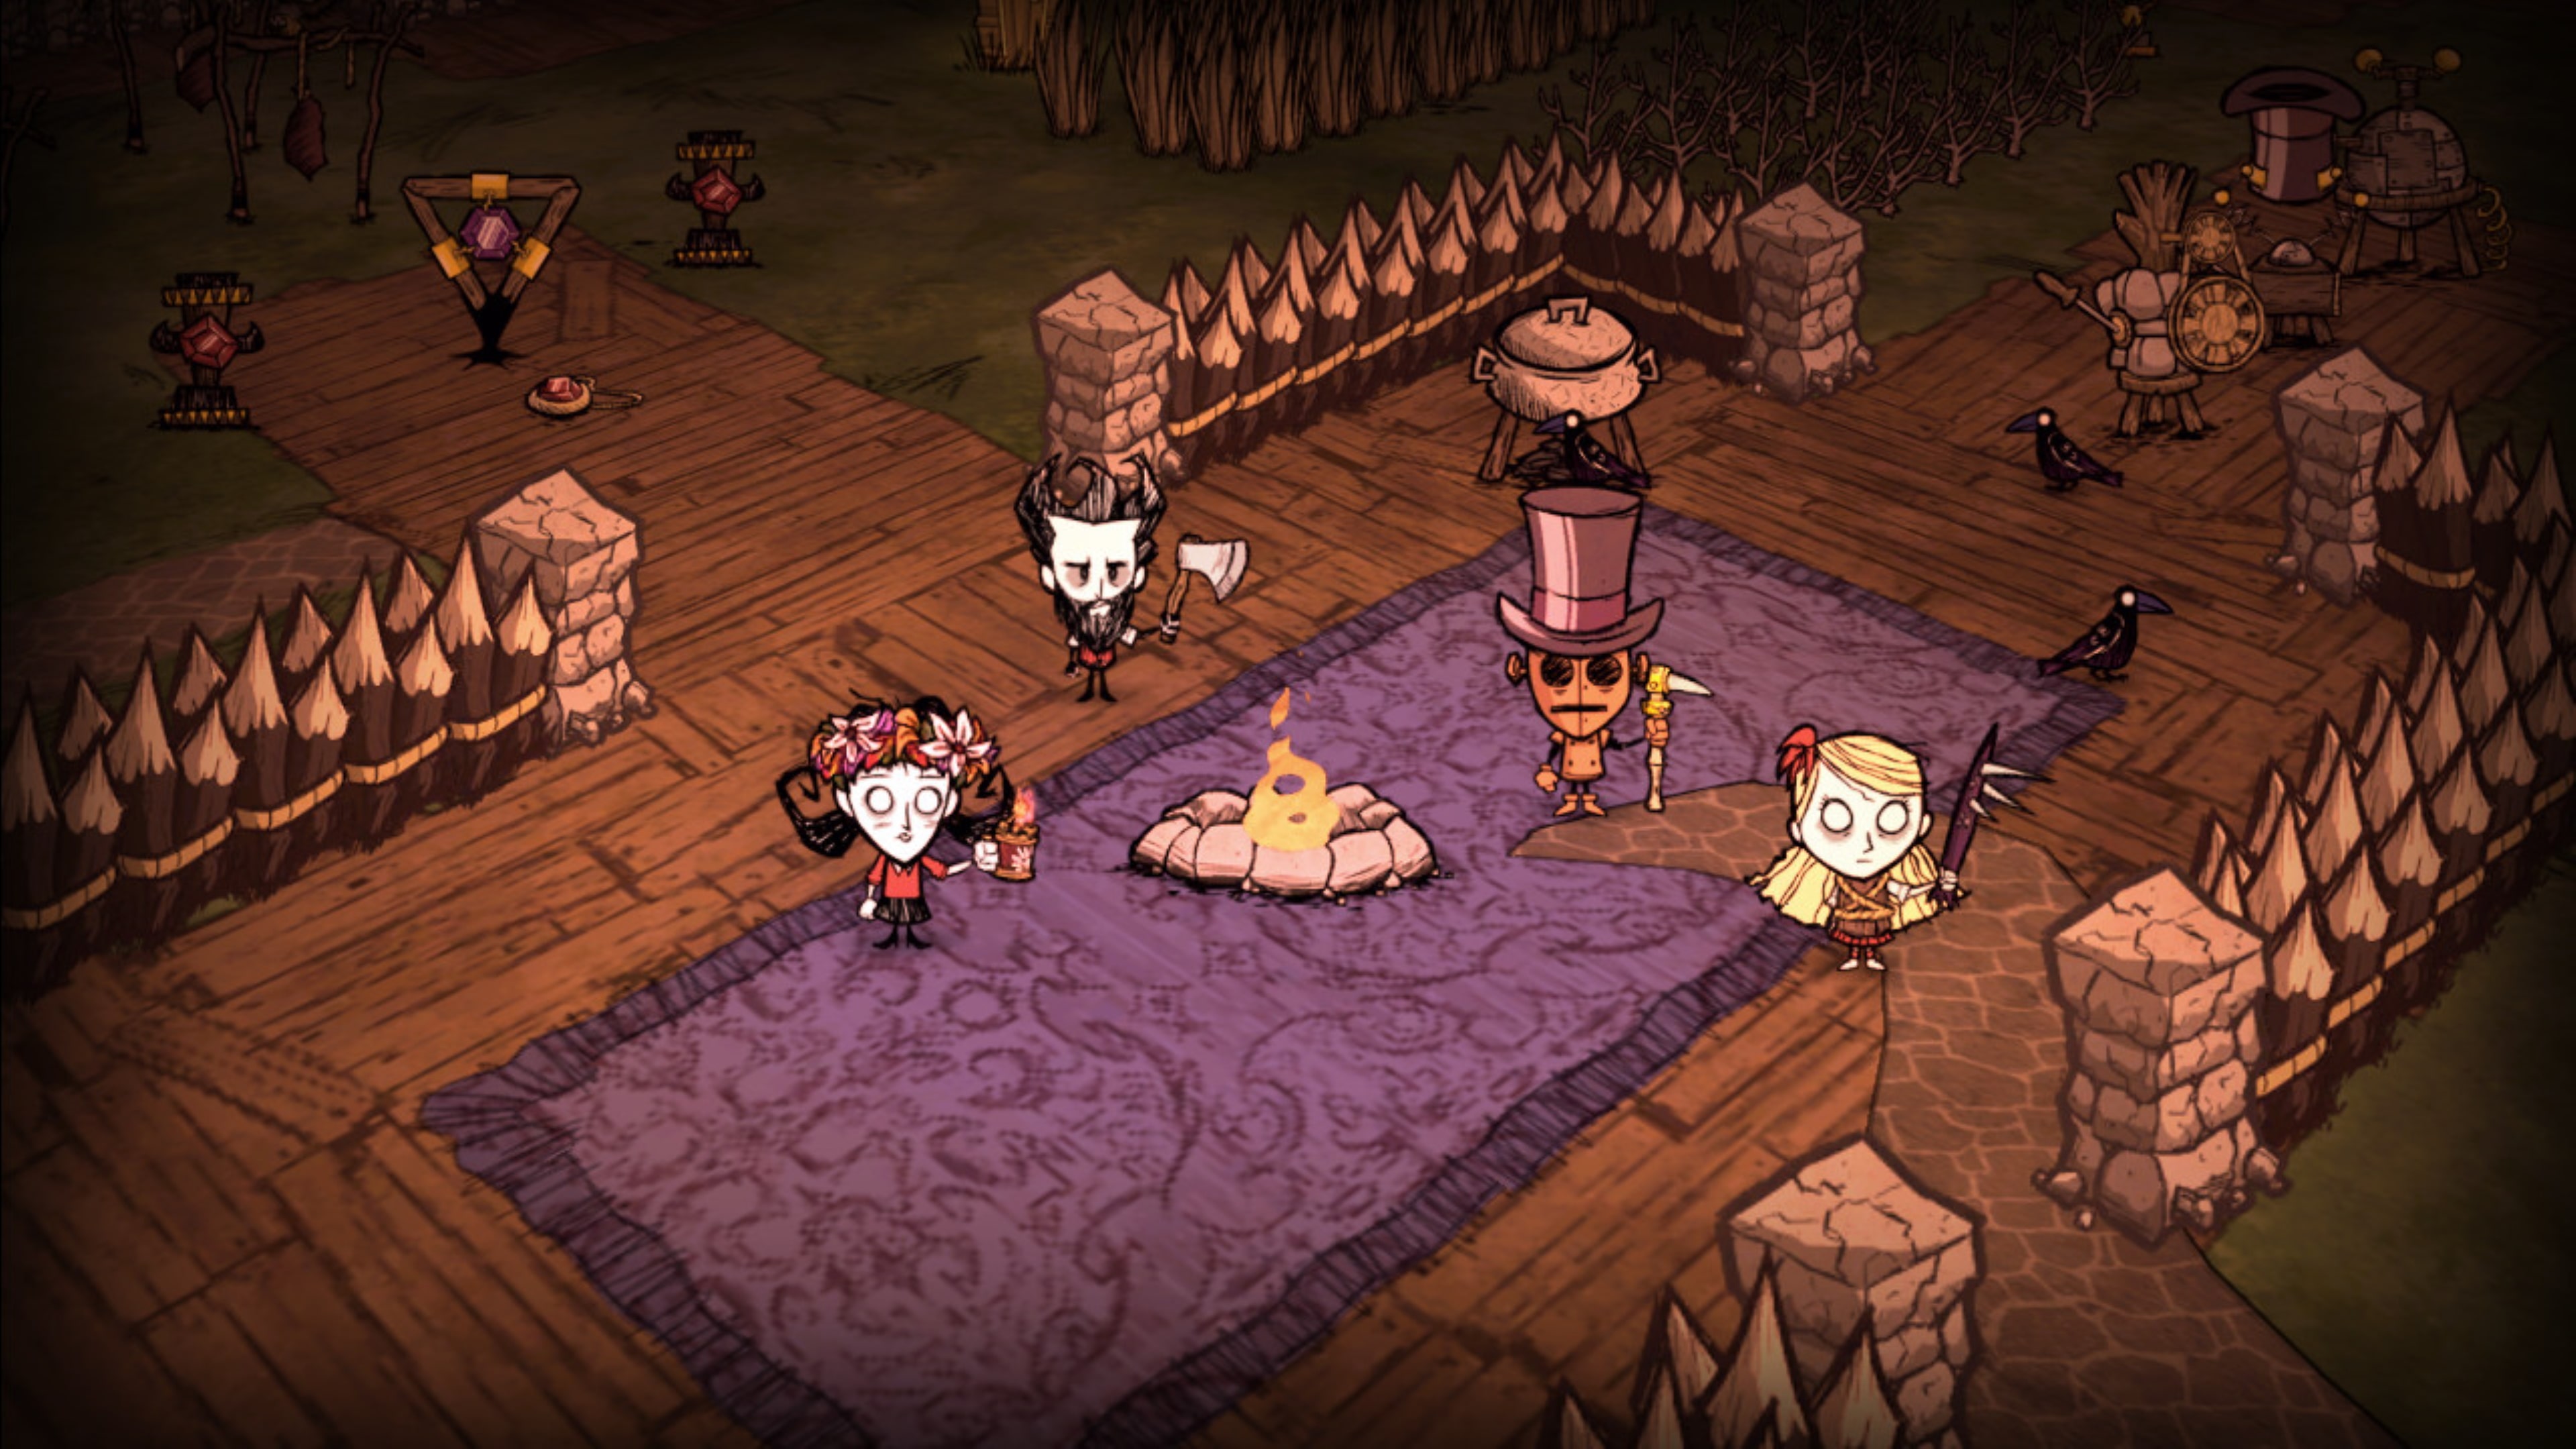 Донт спид. Don t Starve together. Don t Starve игра. Игра донт старв тугезер. Don't Starve together игрушки.